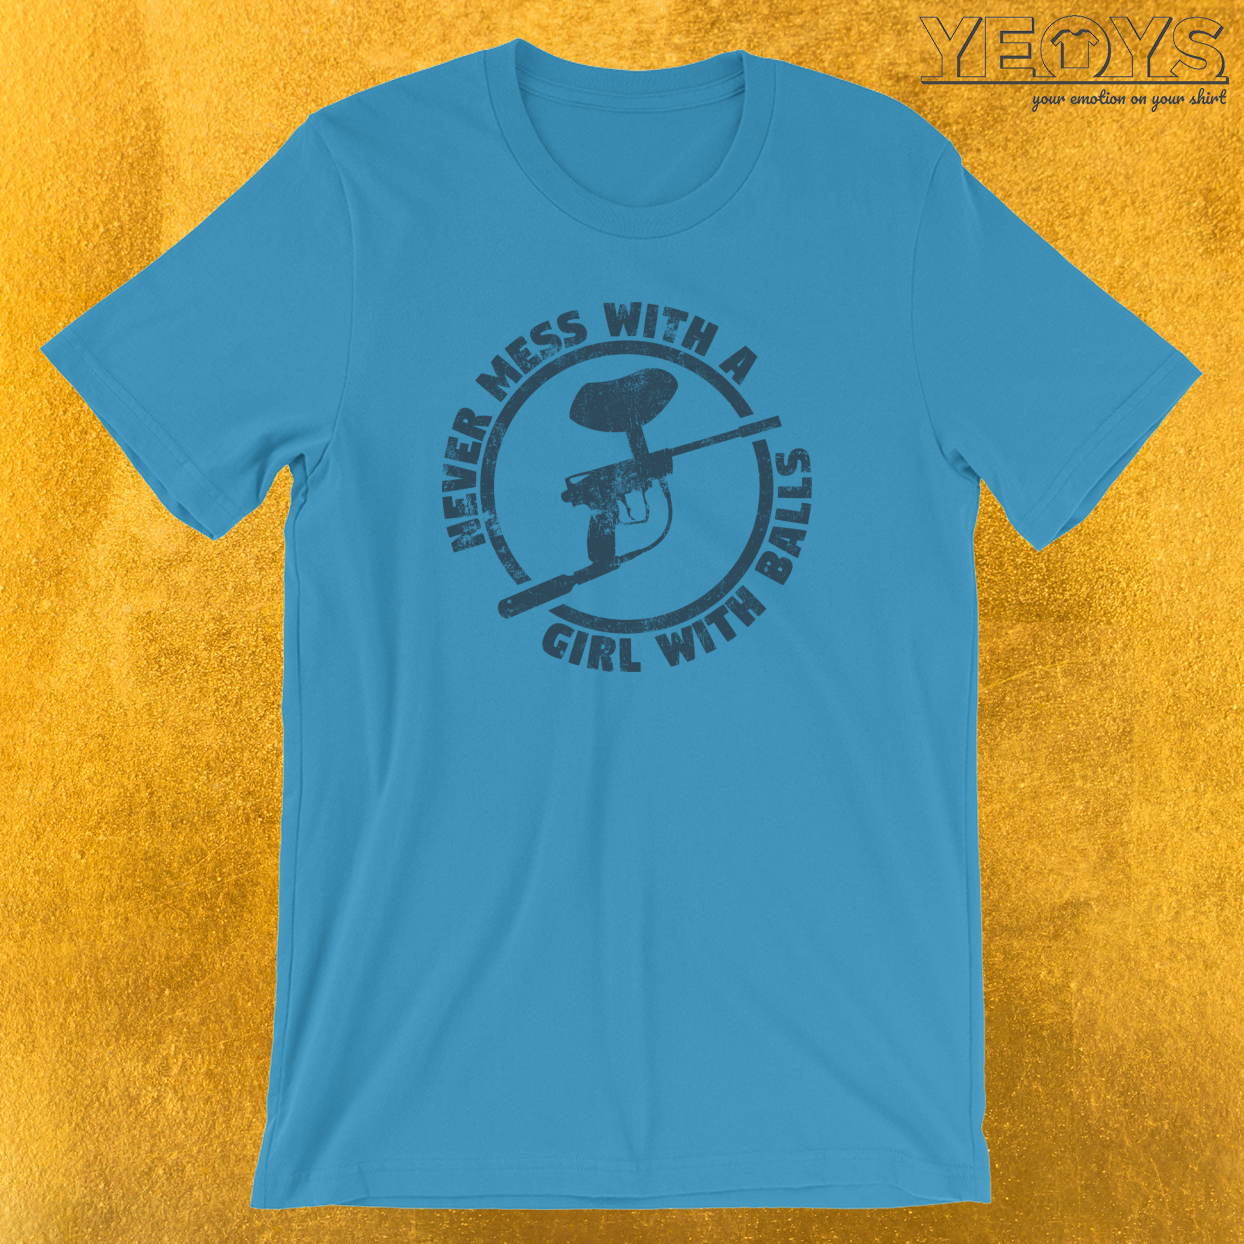 Never Mess With A Girl With Balls T-Shirt